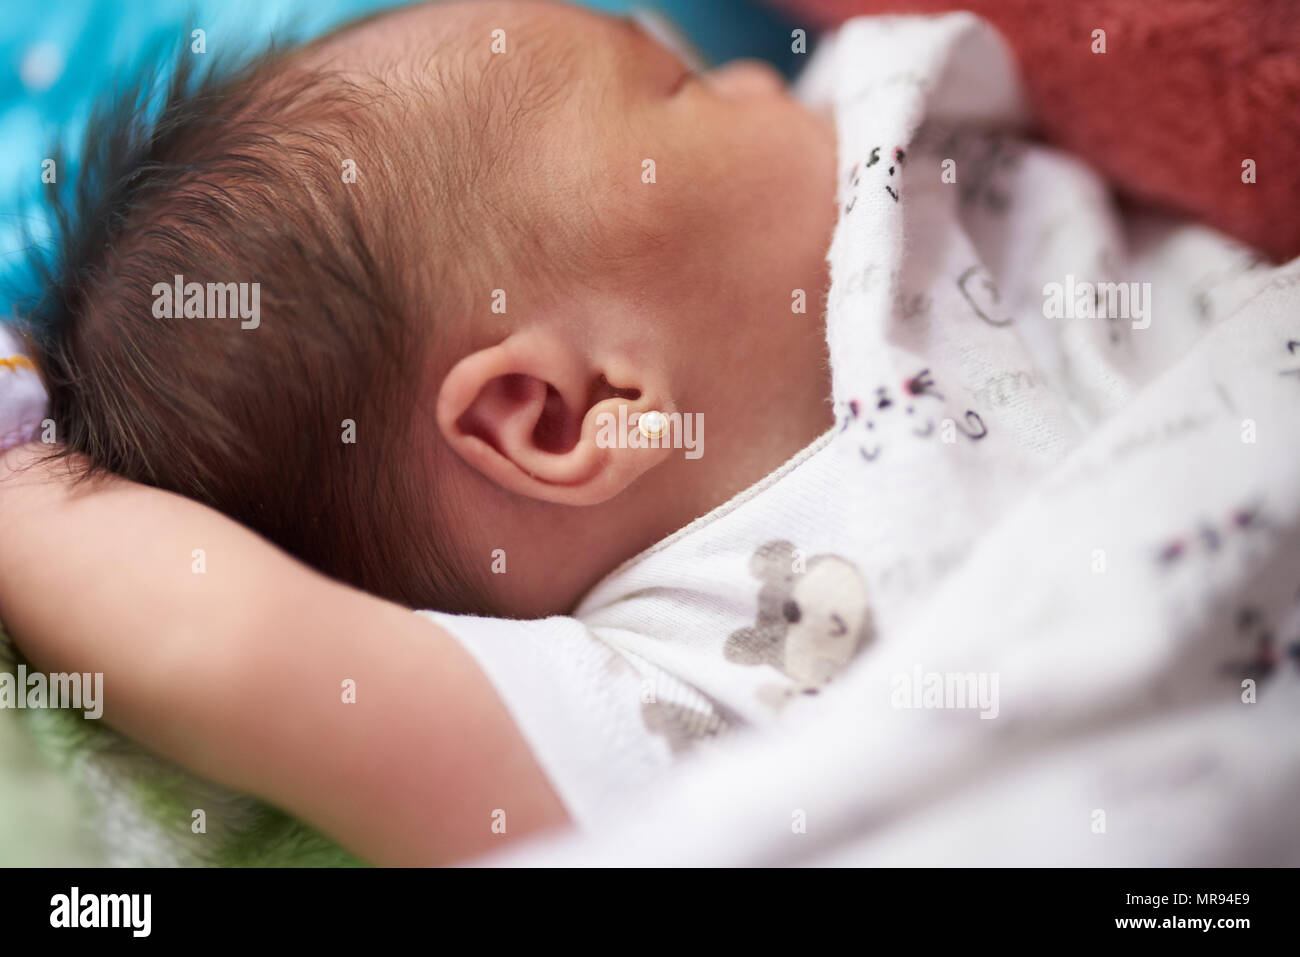 Newborn baby with earring close up view sleeping Stock Photo